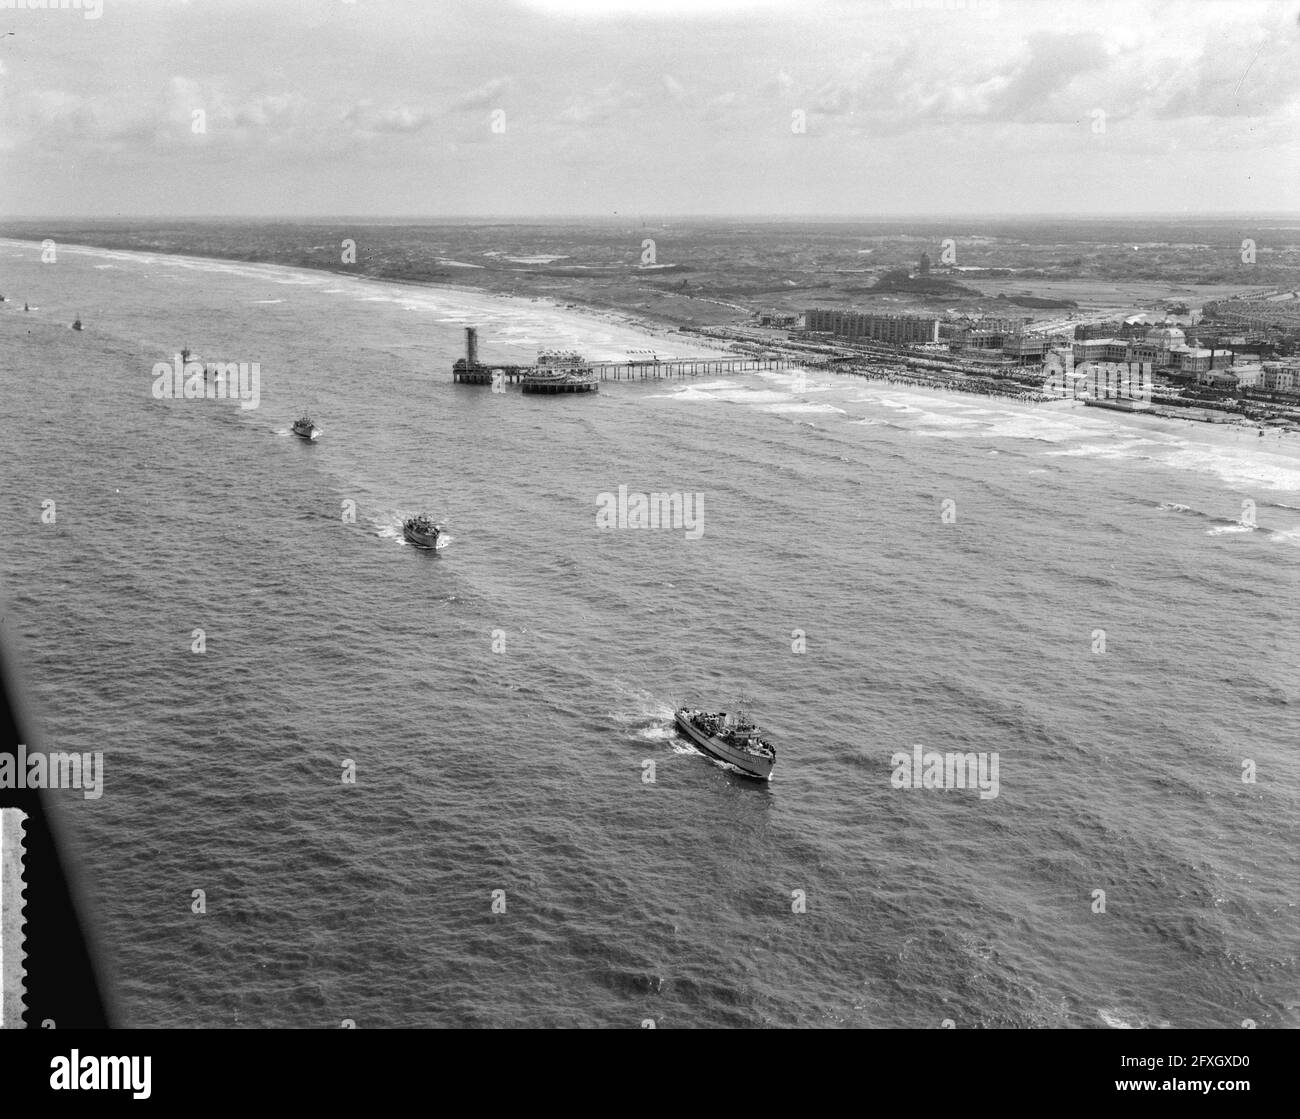 Harvest of the fleet at Scheveningen (aerial photographs), July 6, 1961, The Netherlands, 20th century press agency photo, news to remember, documentary, historic photography 1945-1990, visual stories, human history of the Twentieth Century, capturing moments in time Stock Photo